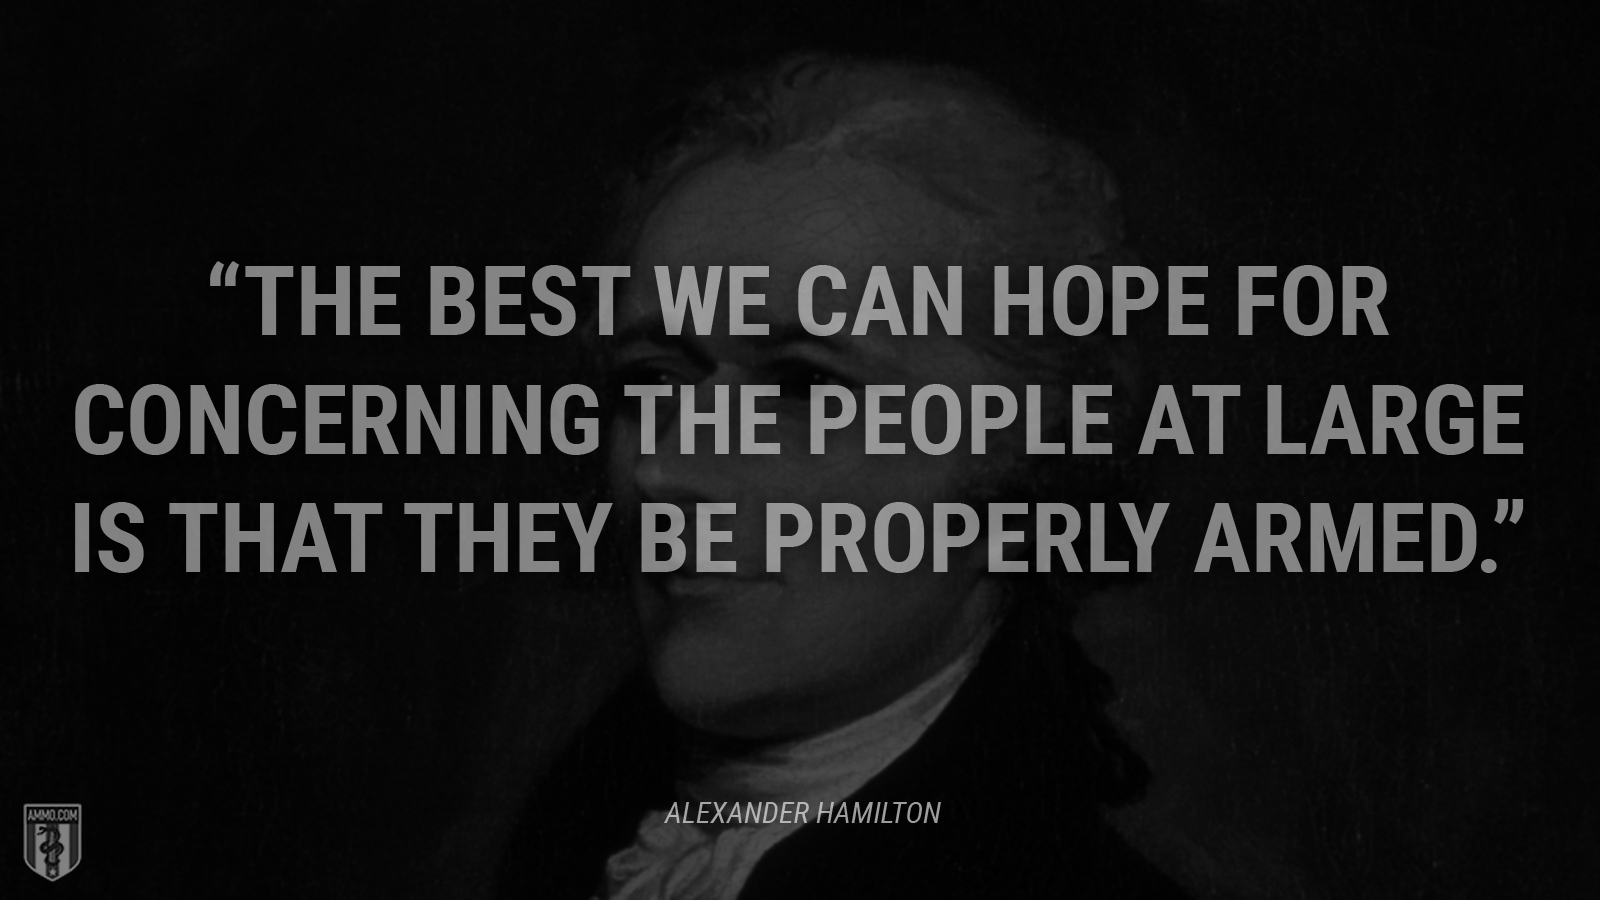 “The best we can hope for concerning the people at large is that they be properly armed.” - Alexander Hamilton